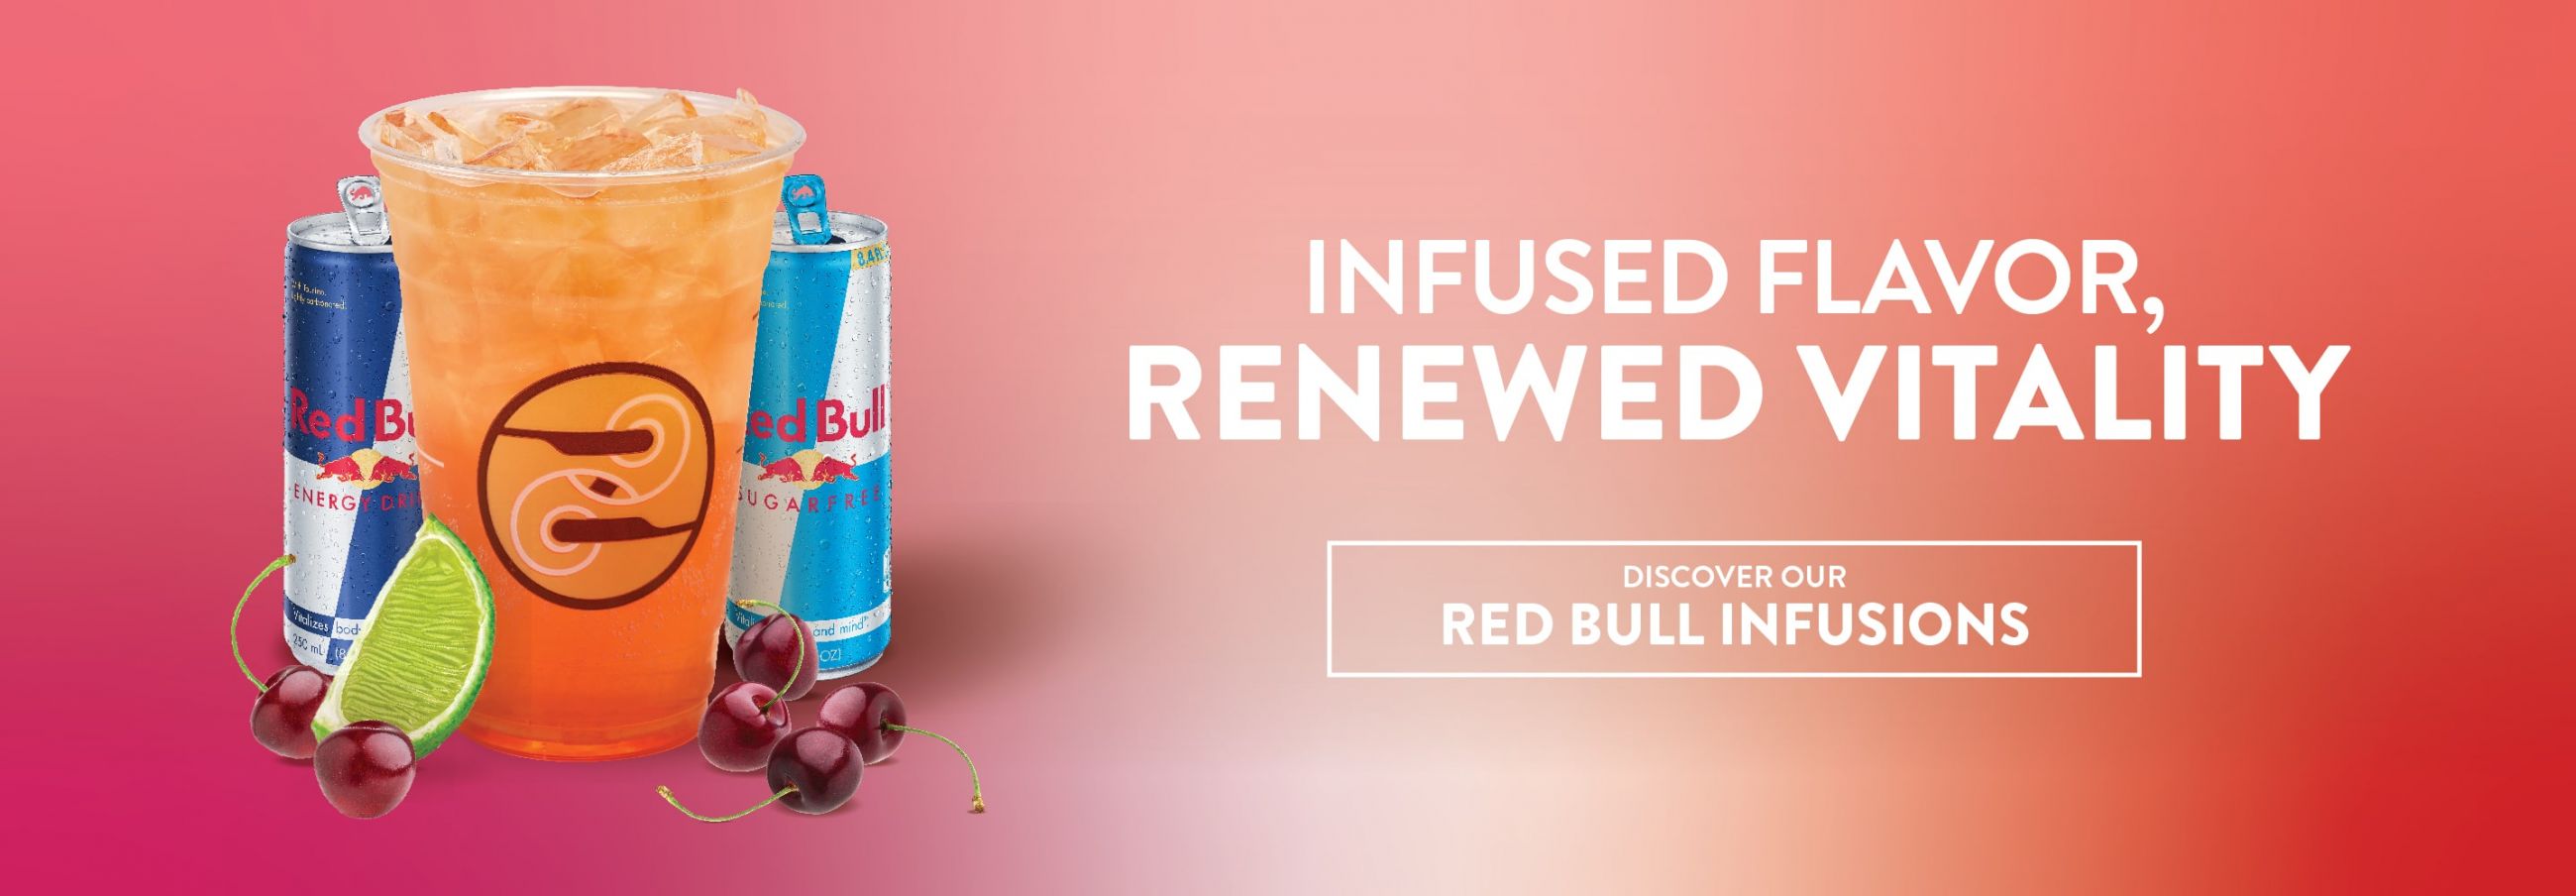 Infused flavor renewed vitality. Click to discover our Red Bull Infusions.